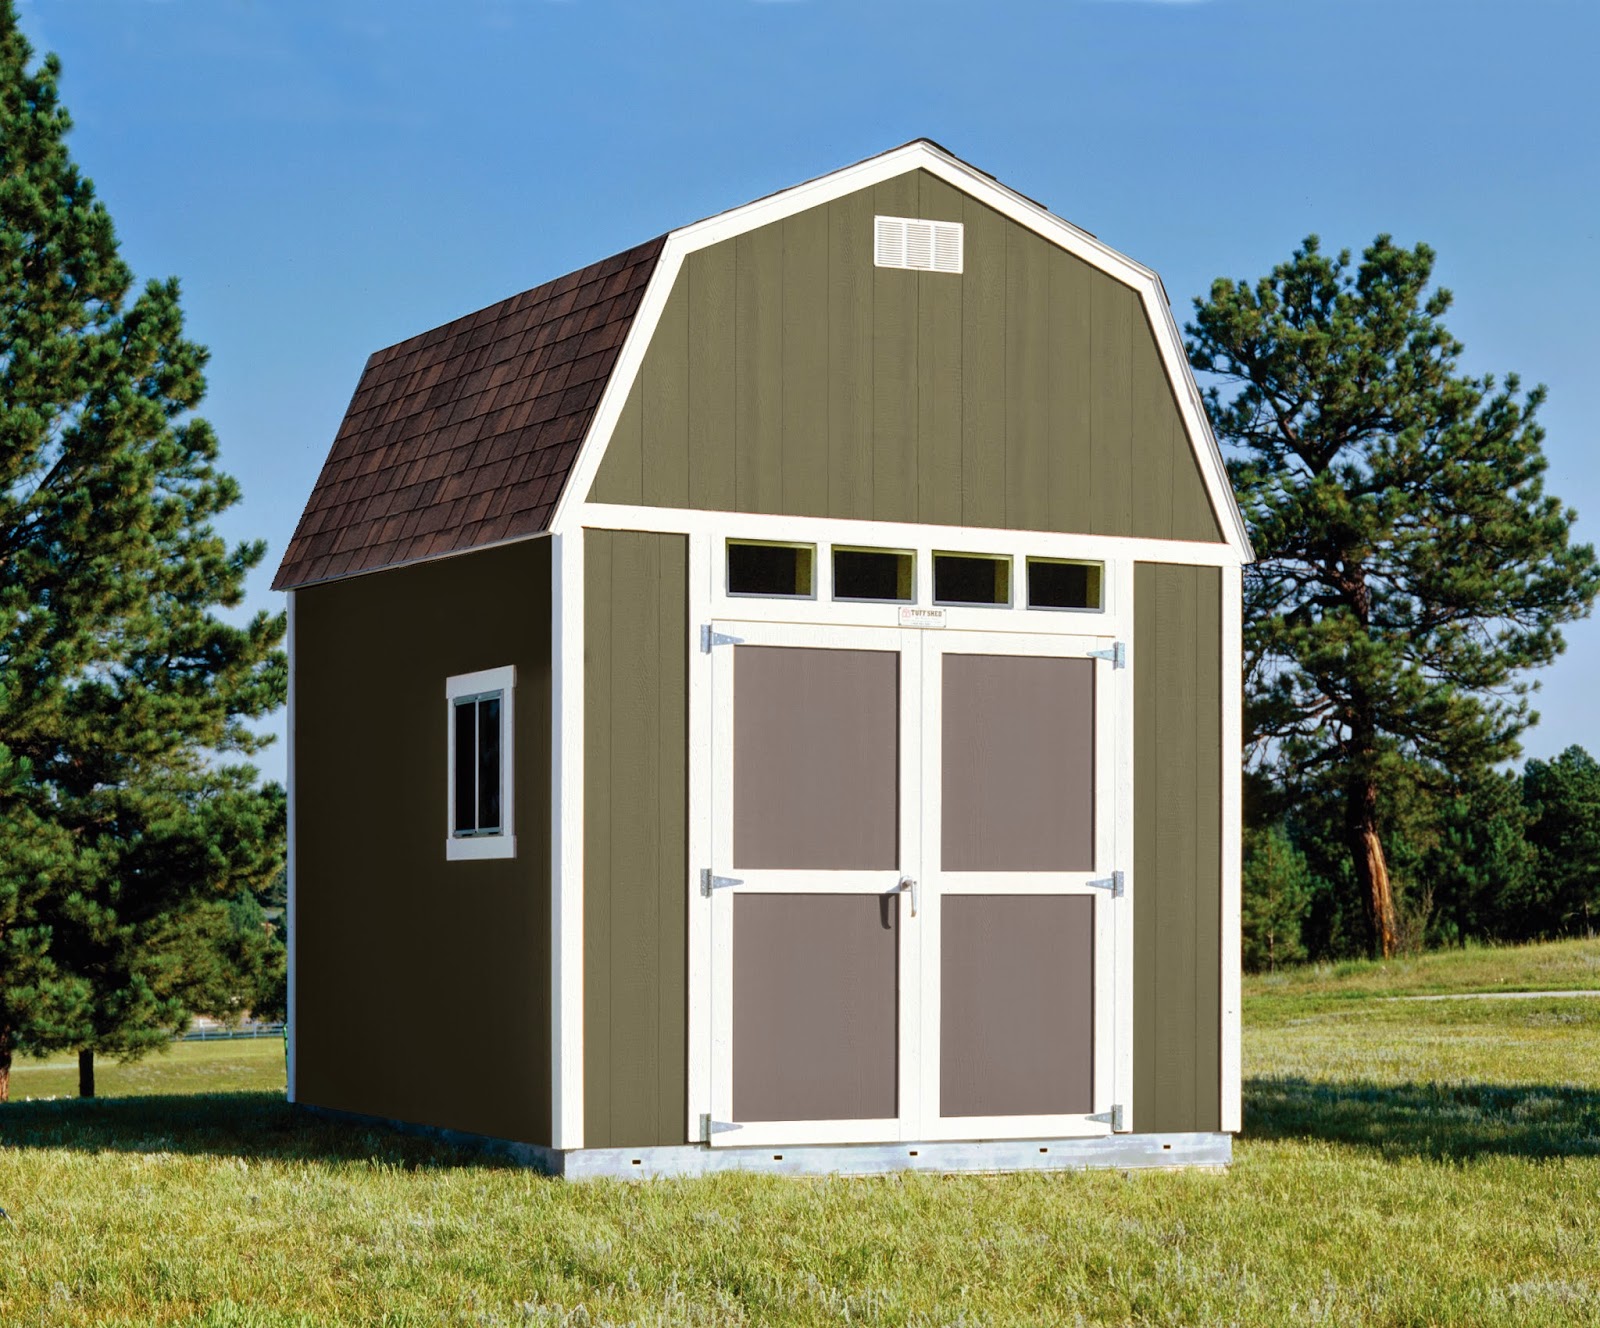 transom shed doors & 6u2032 double door entry with transom